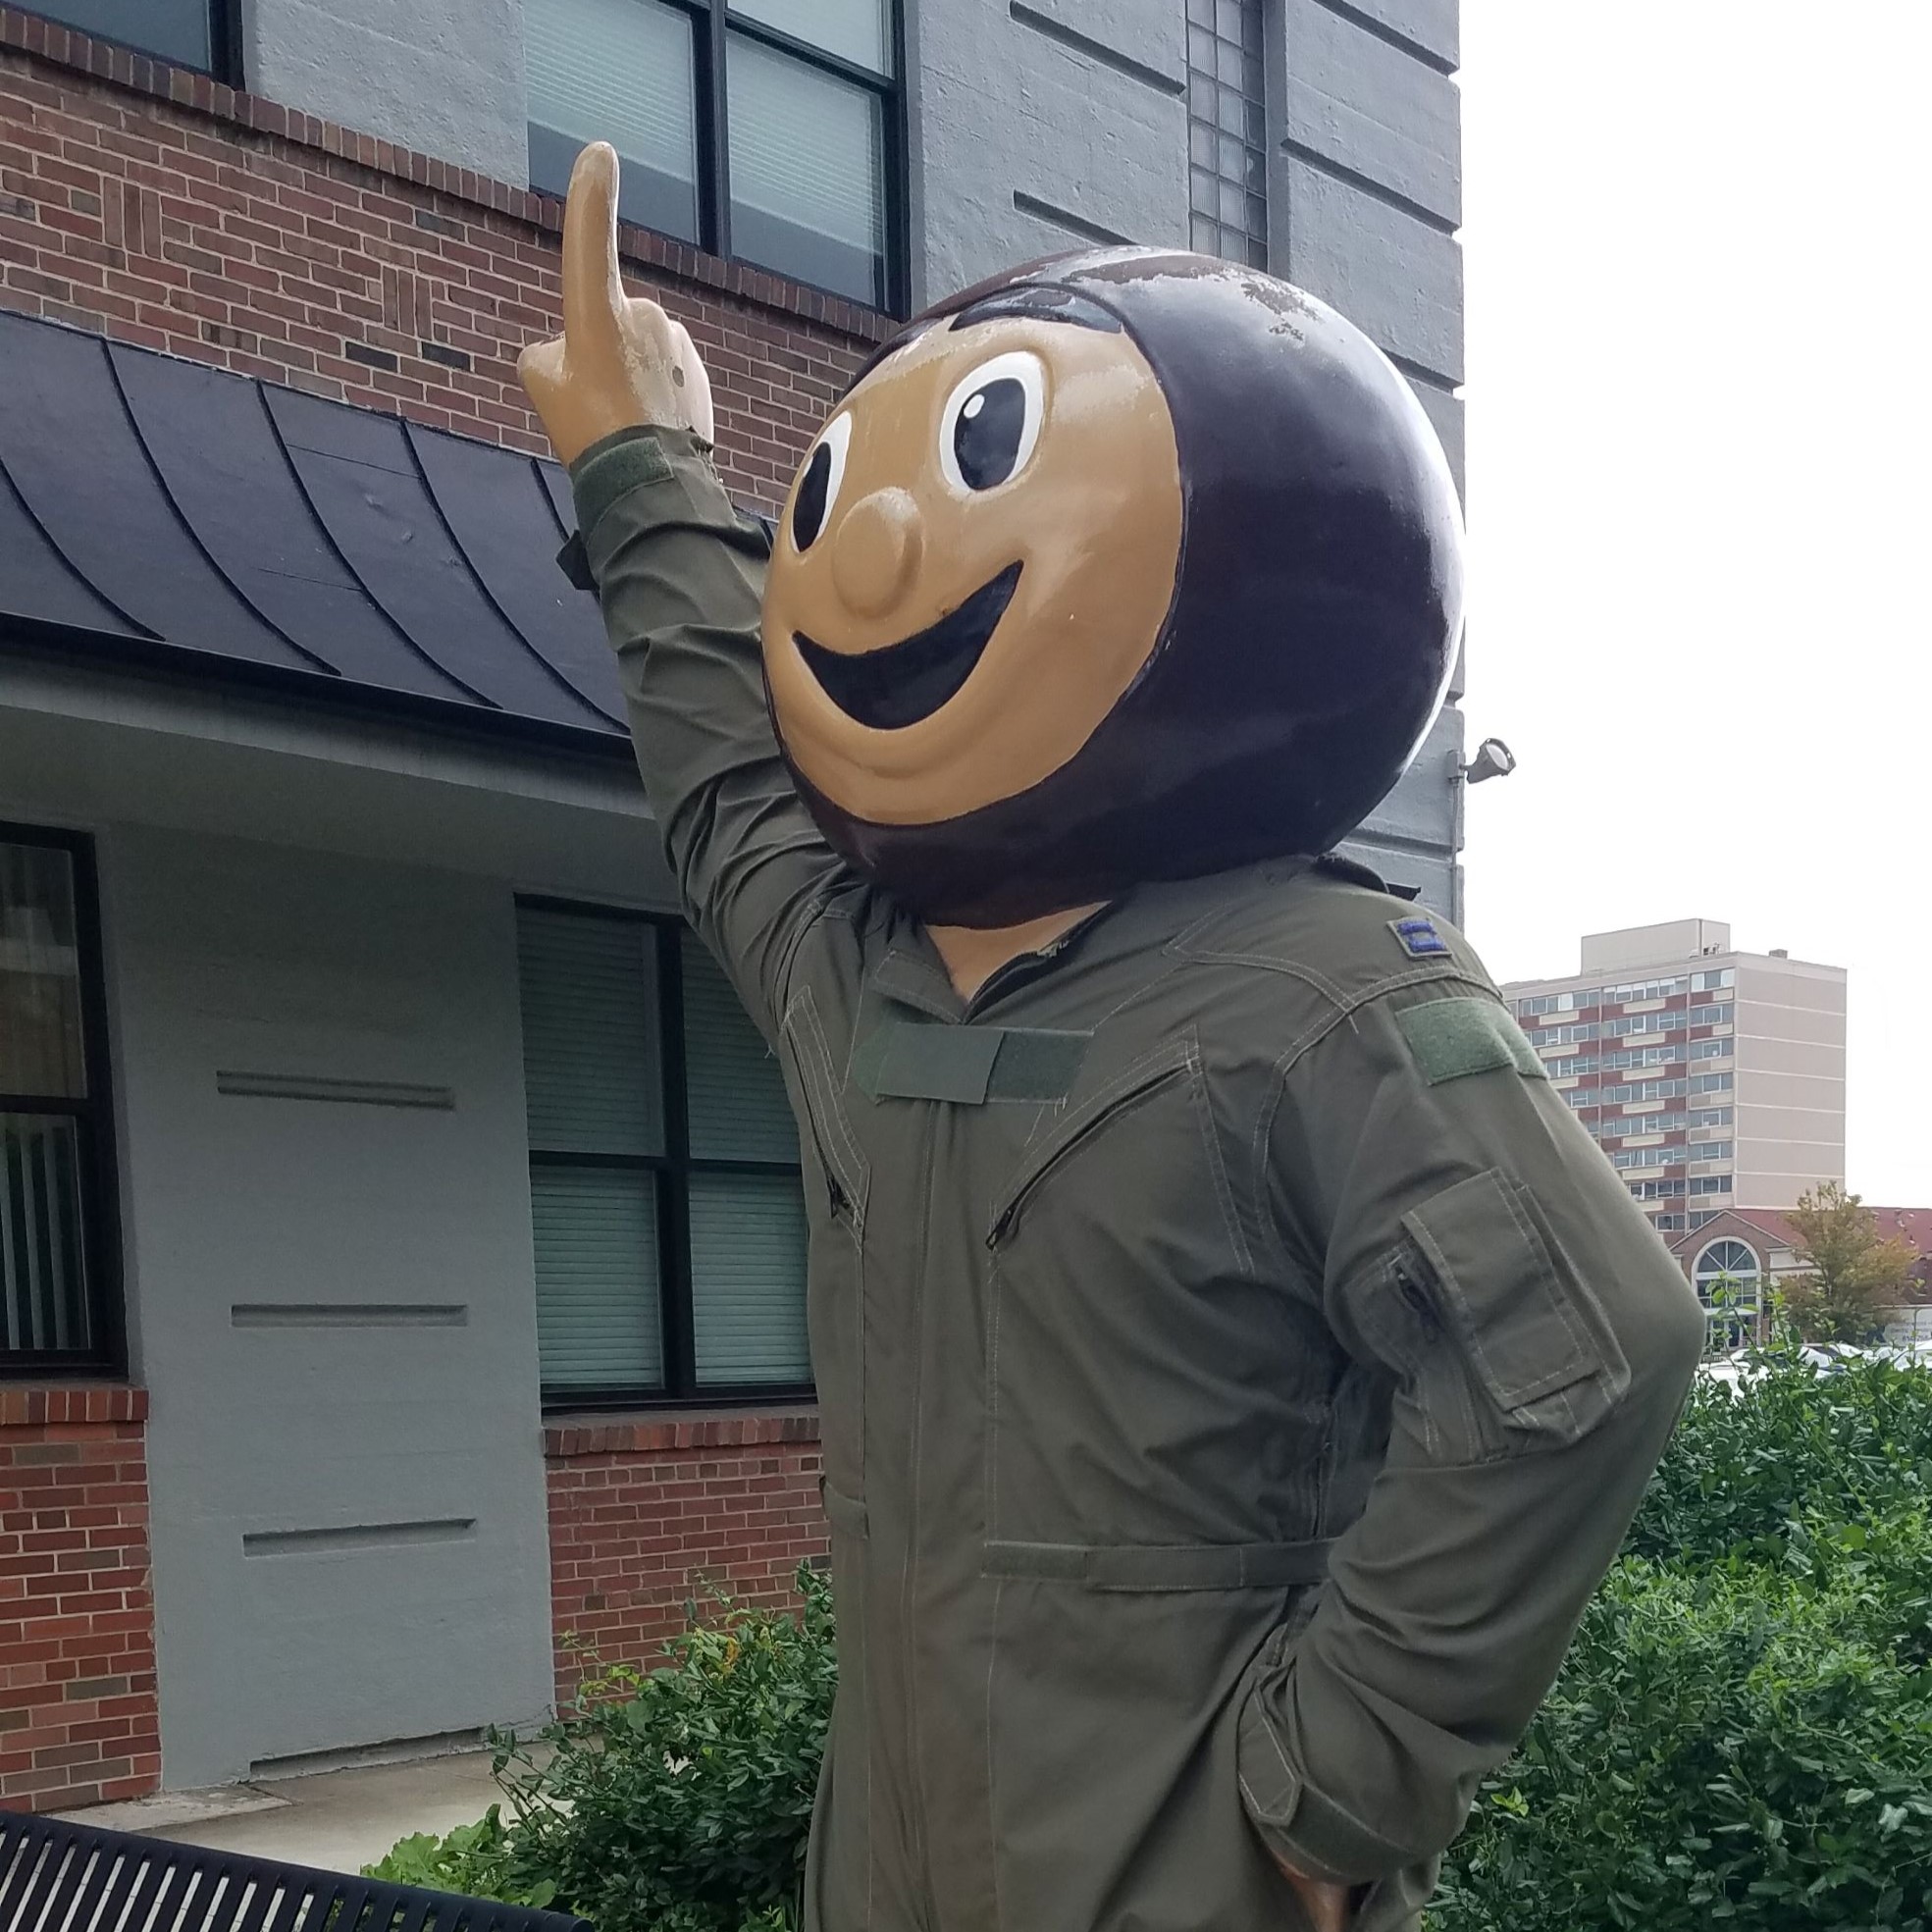 Larger than life size Ohio State University "Bucky" mascot statue dressed in green military flight suit outside The Ohio State University ROTC building.